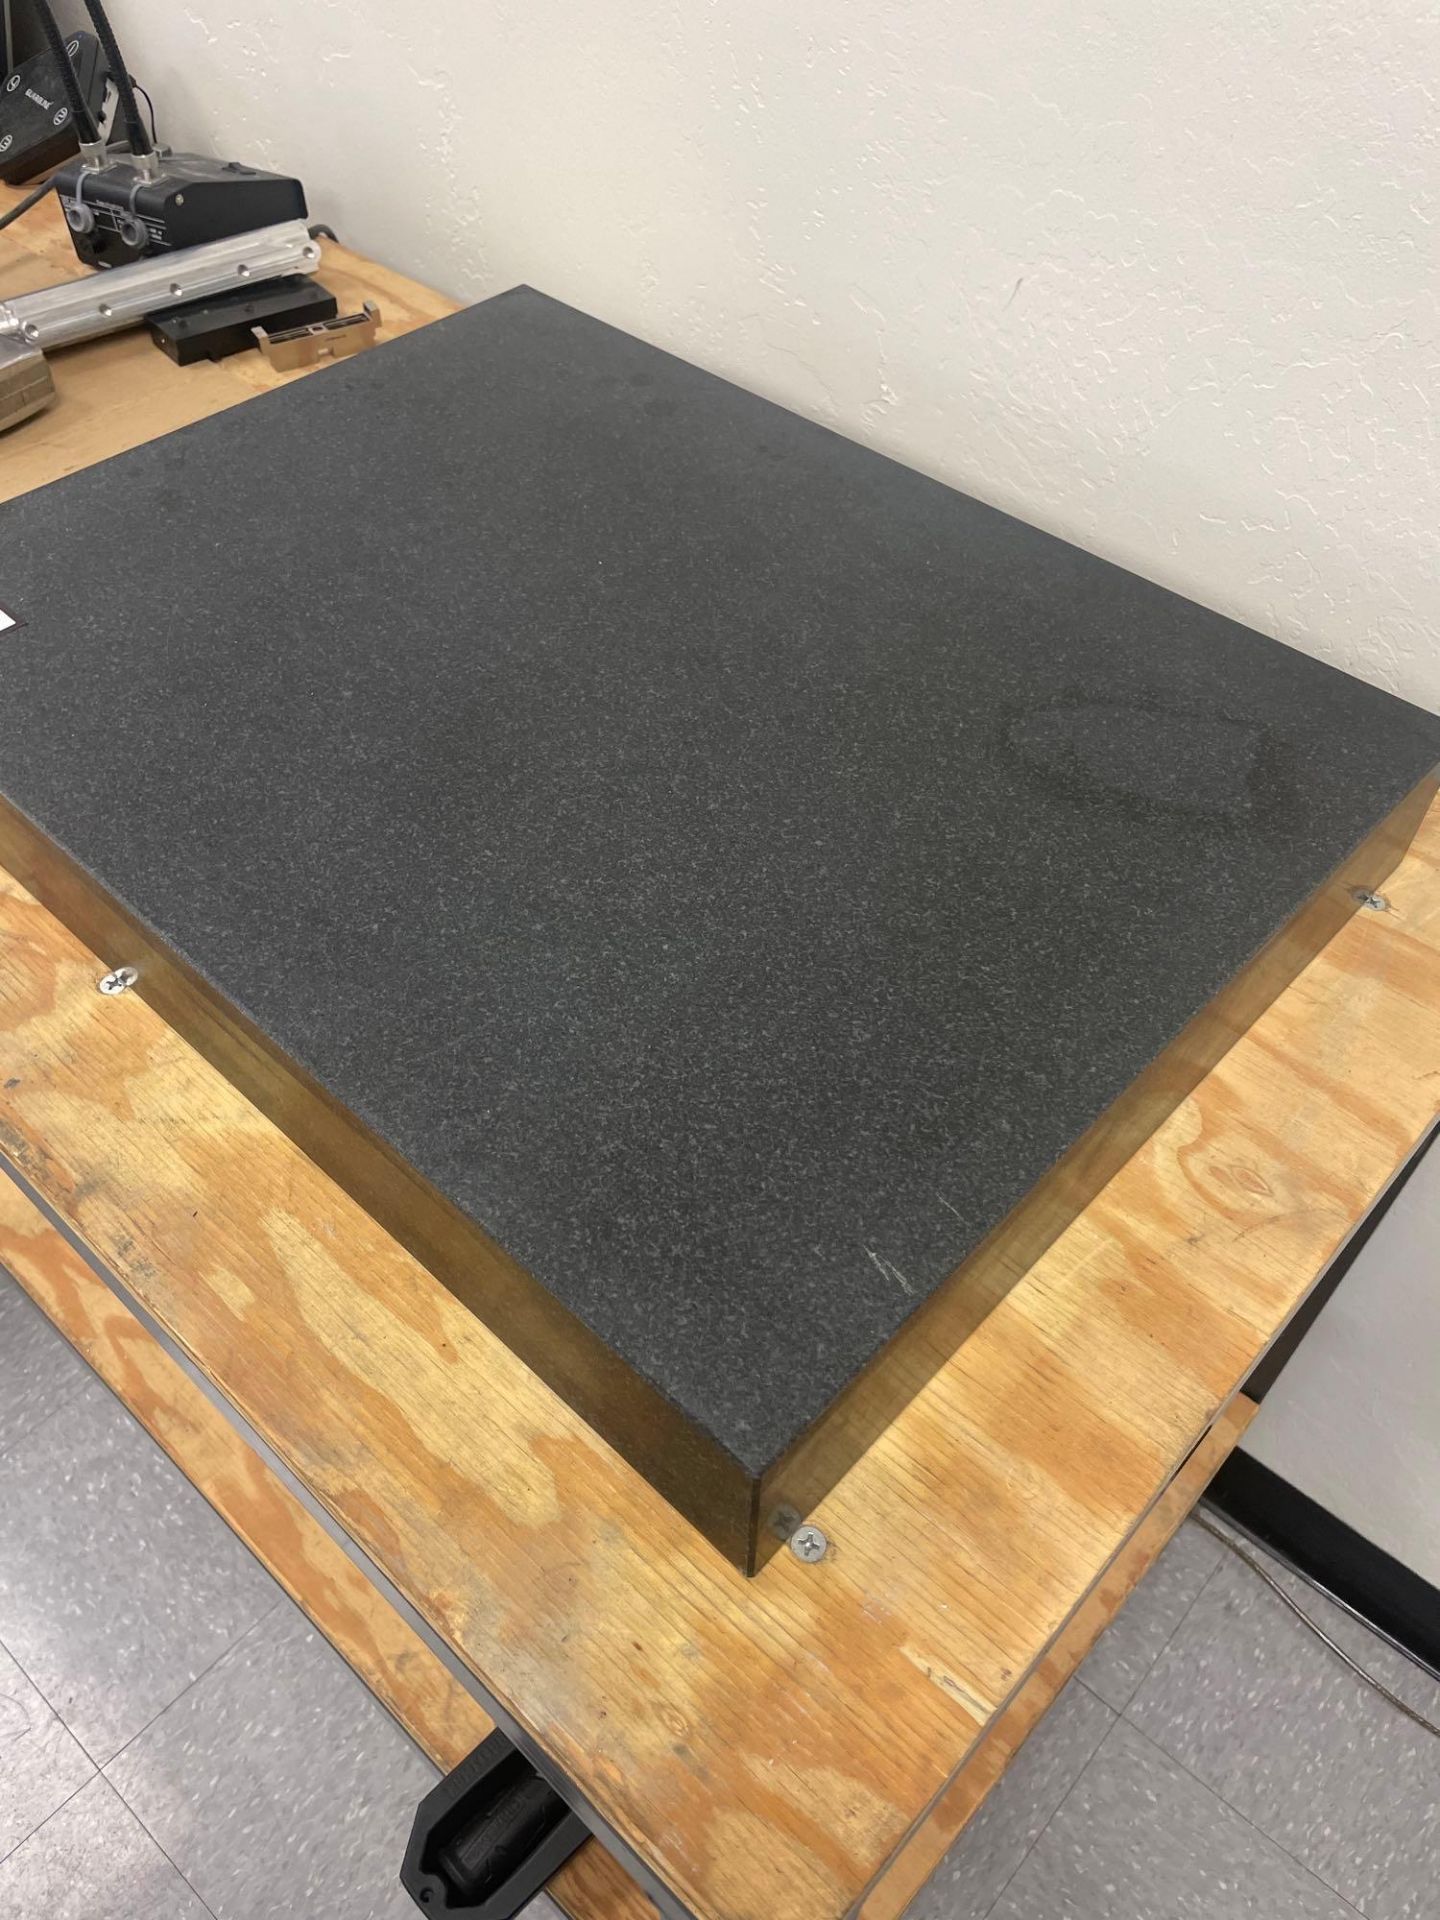 18" x 24" Granite Surface Plate - Image 3 of 4